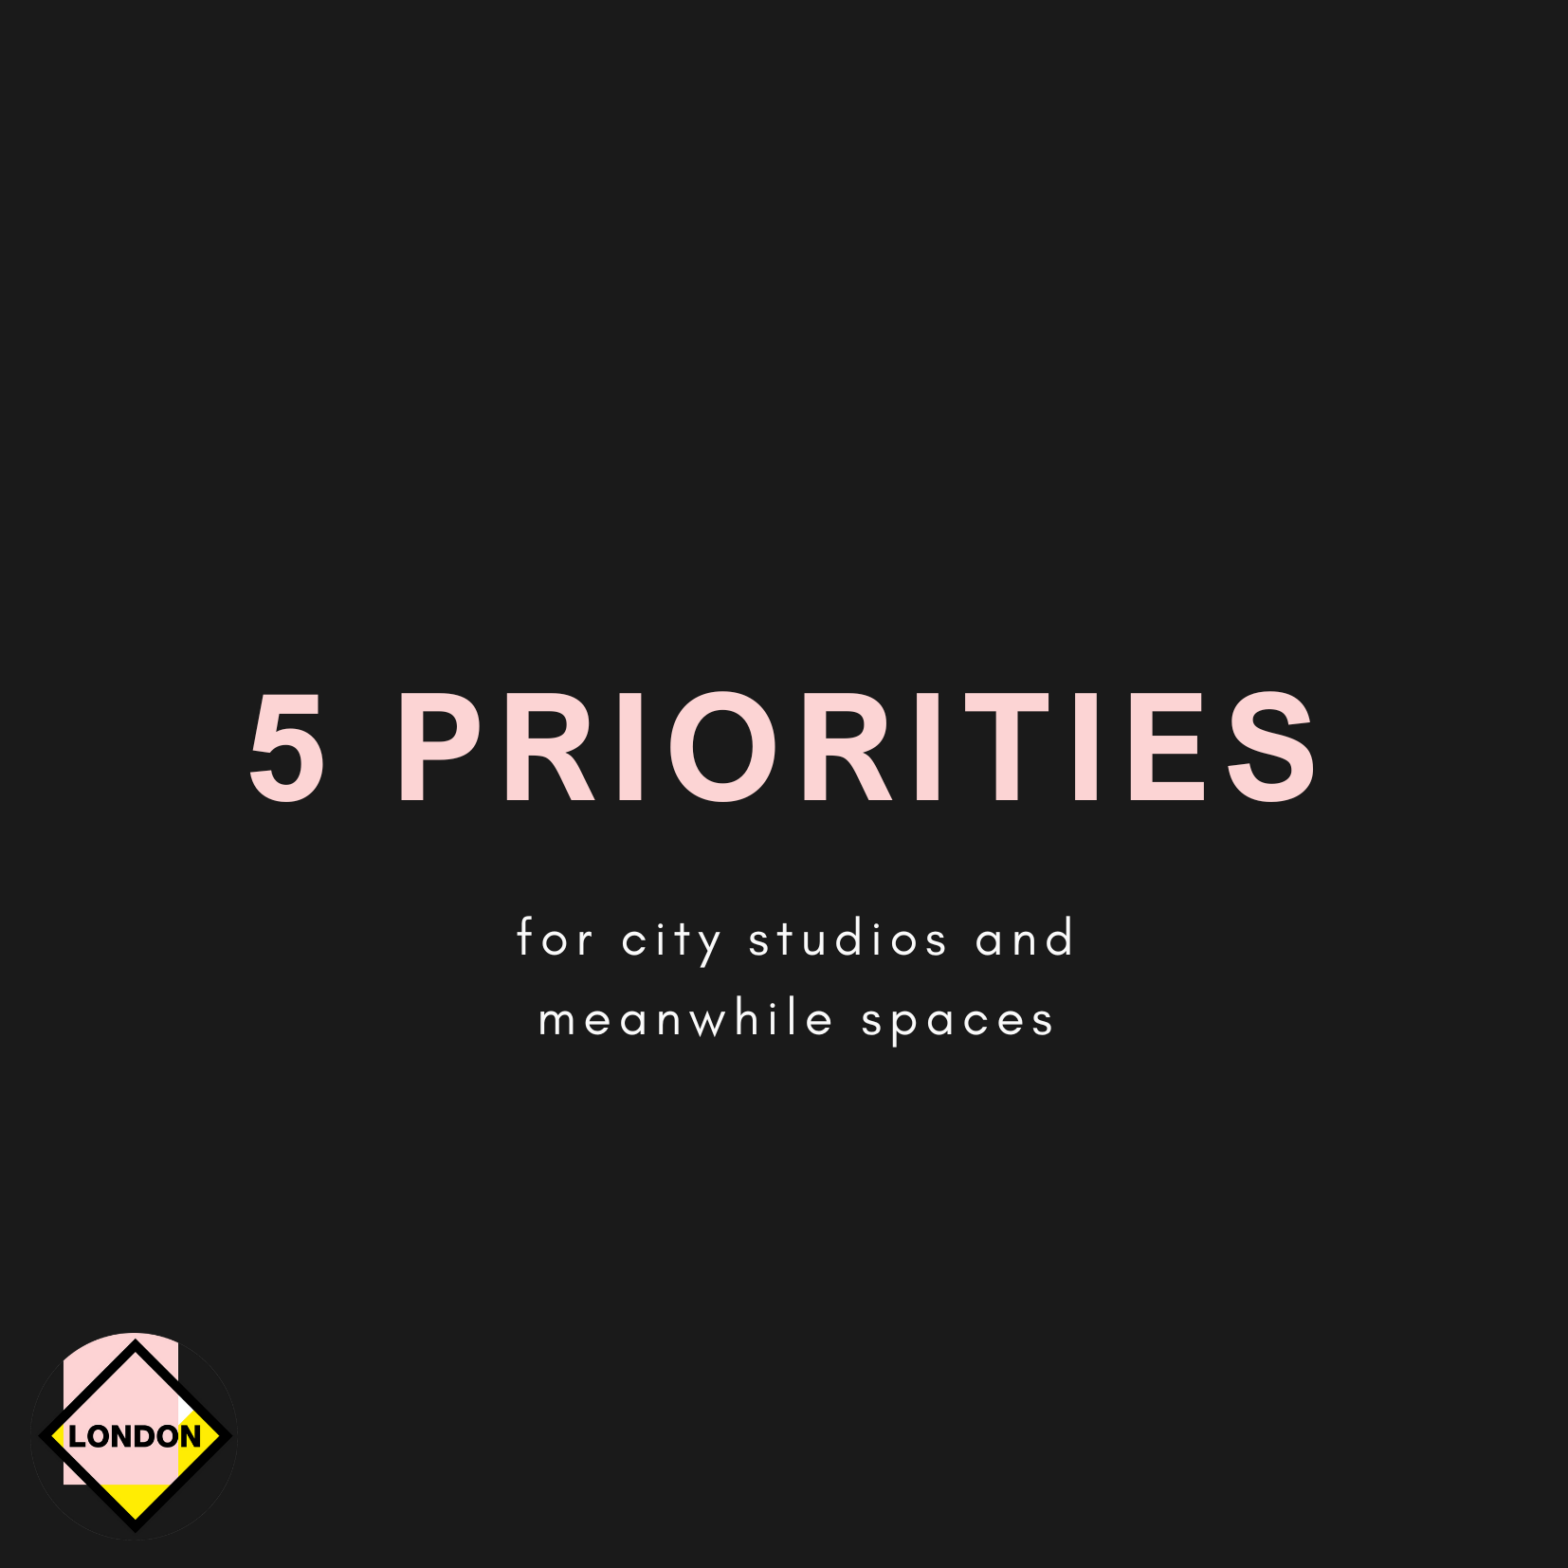 5 Priorities for city studios and meanwhile spaces [CVAN London]